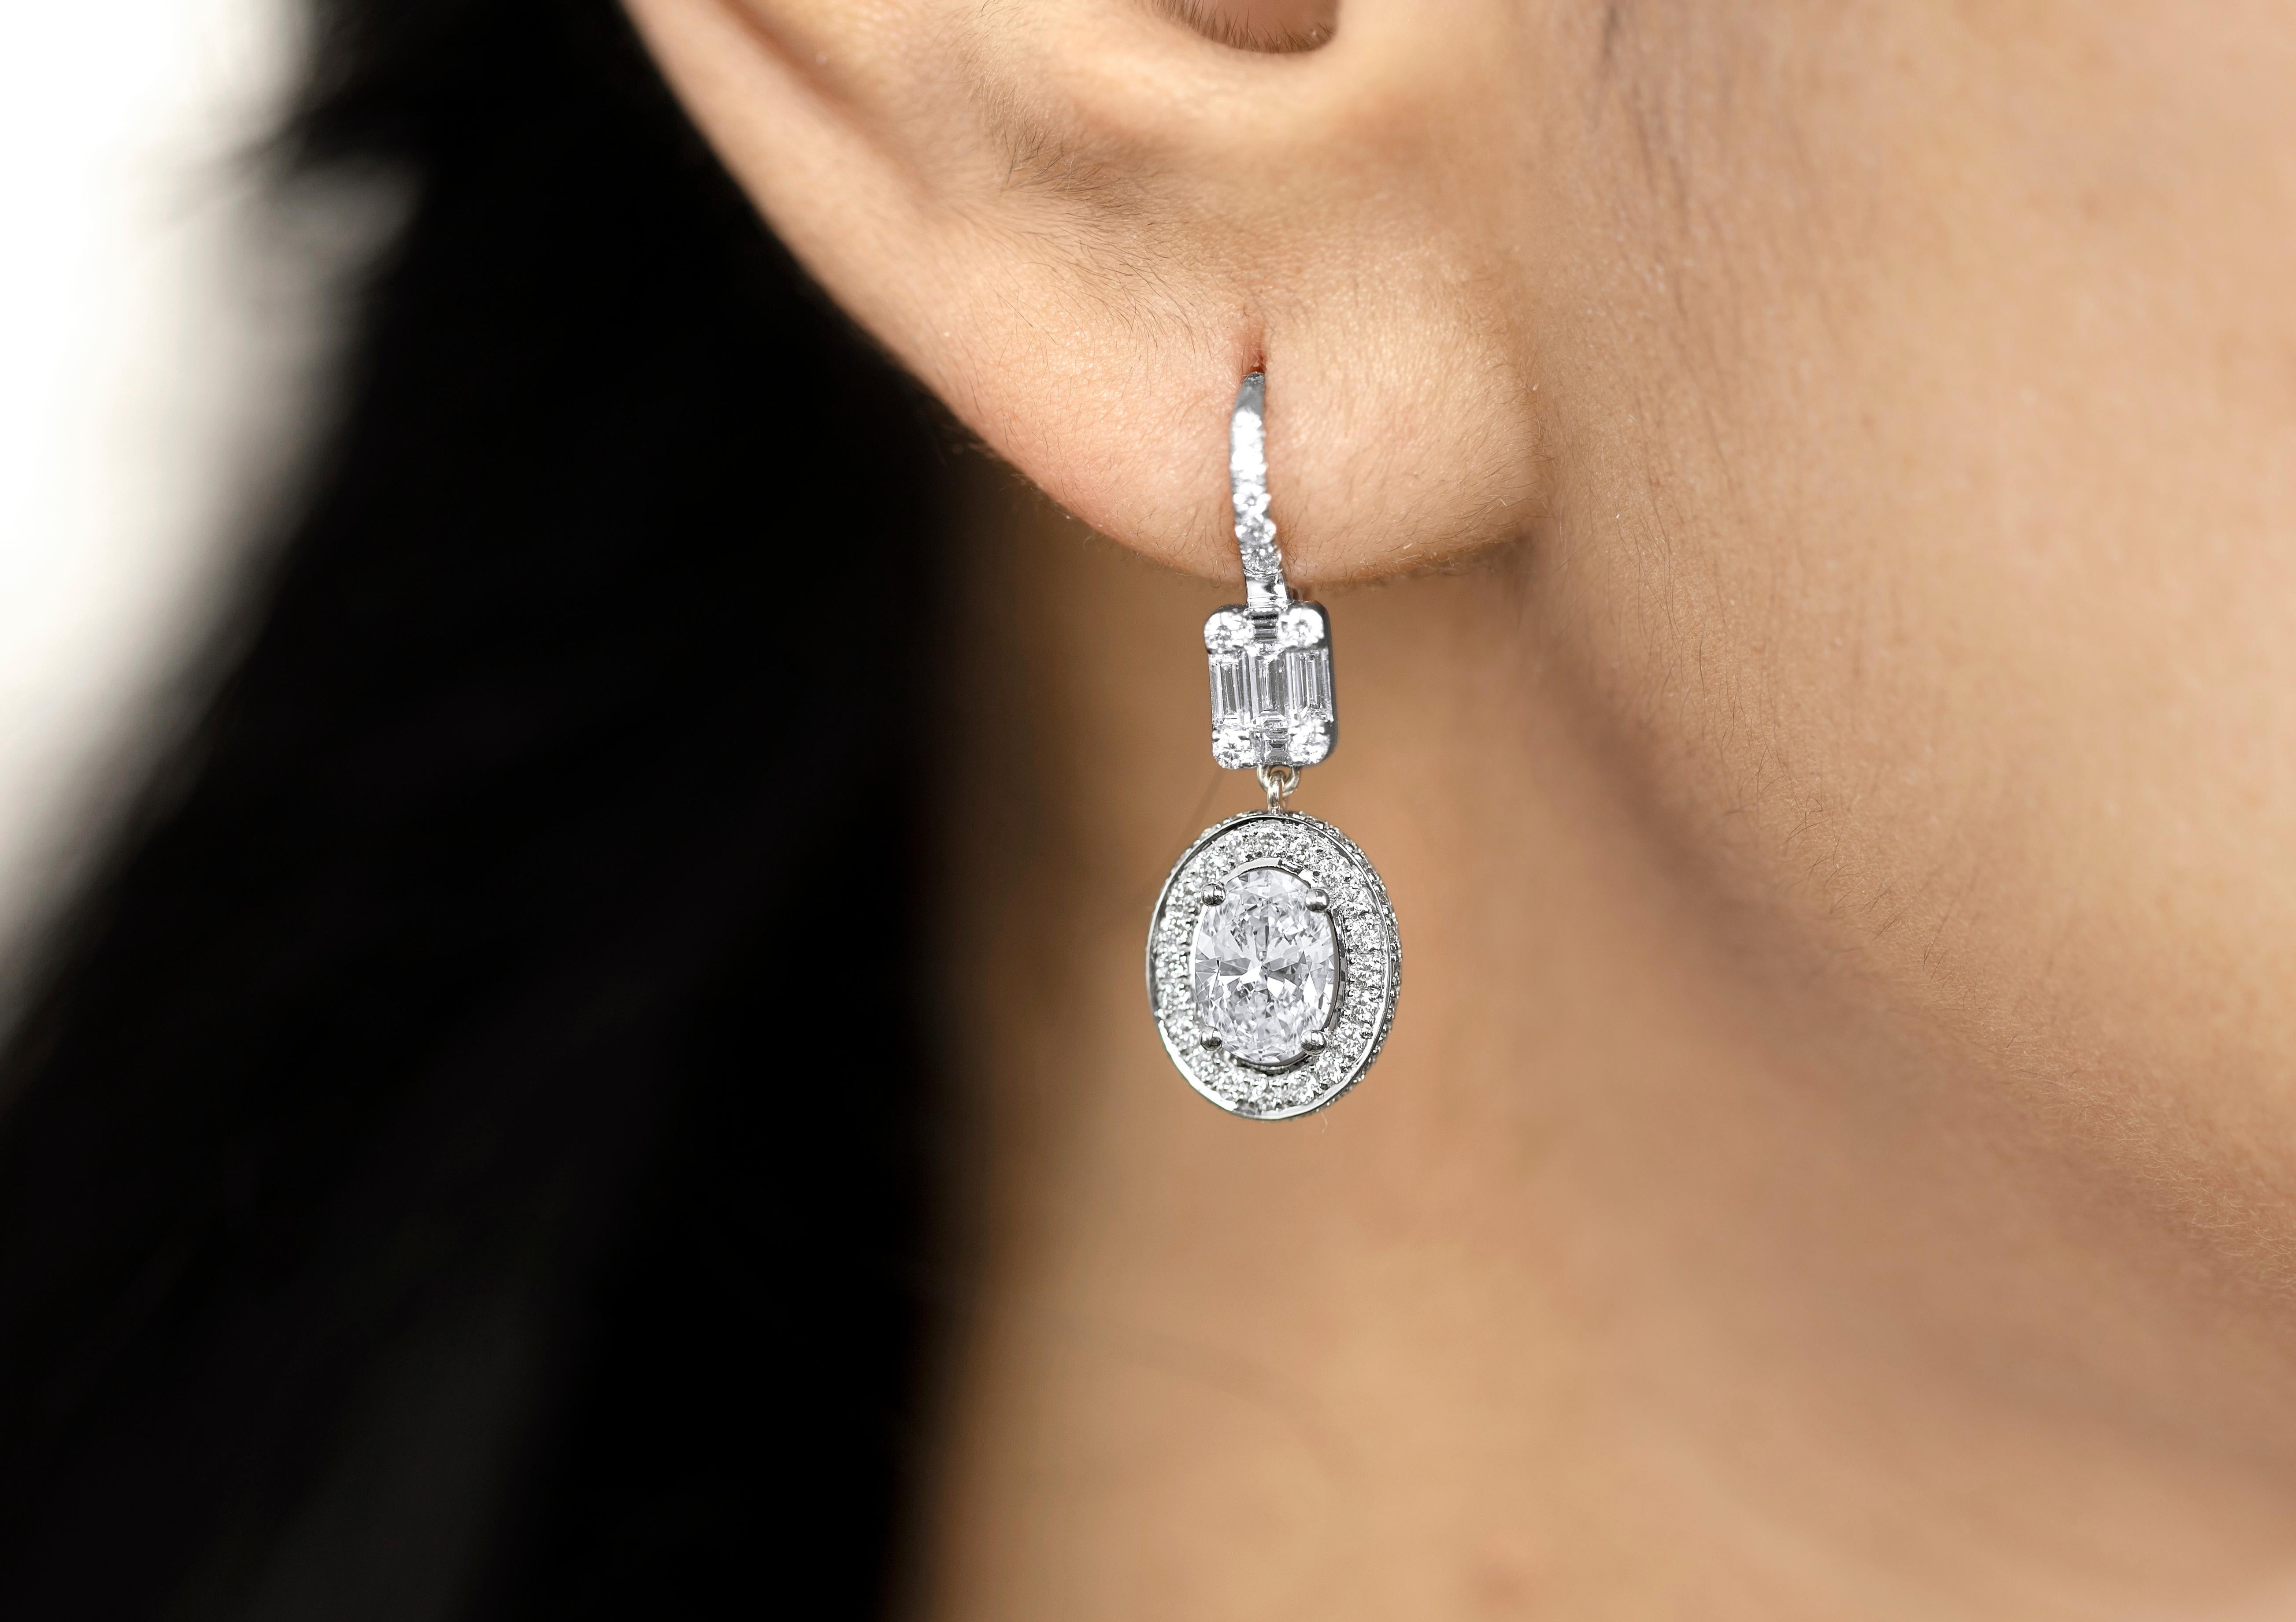 GIA Report Certified 1 Carat Art Deco Diamond Baguette Cut Earrings with Illusion Setting, E F VS 


Available in 18k white gold.

Same design can be made also with other custom gemstones per request.

Product details:

- Solid gold (approx. 5.3